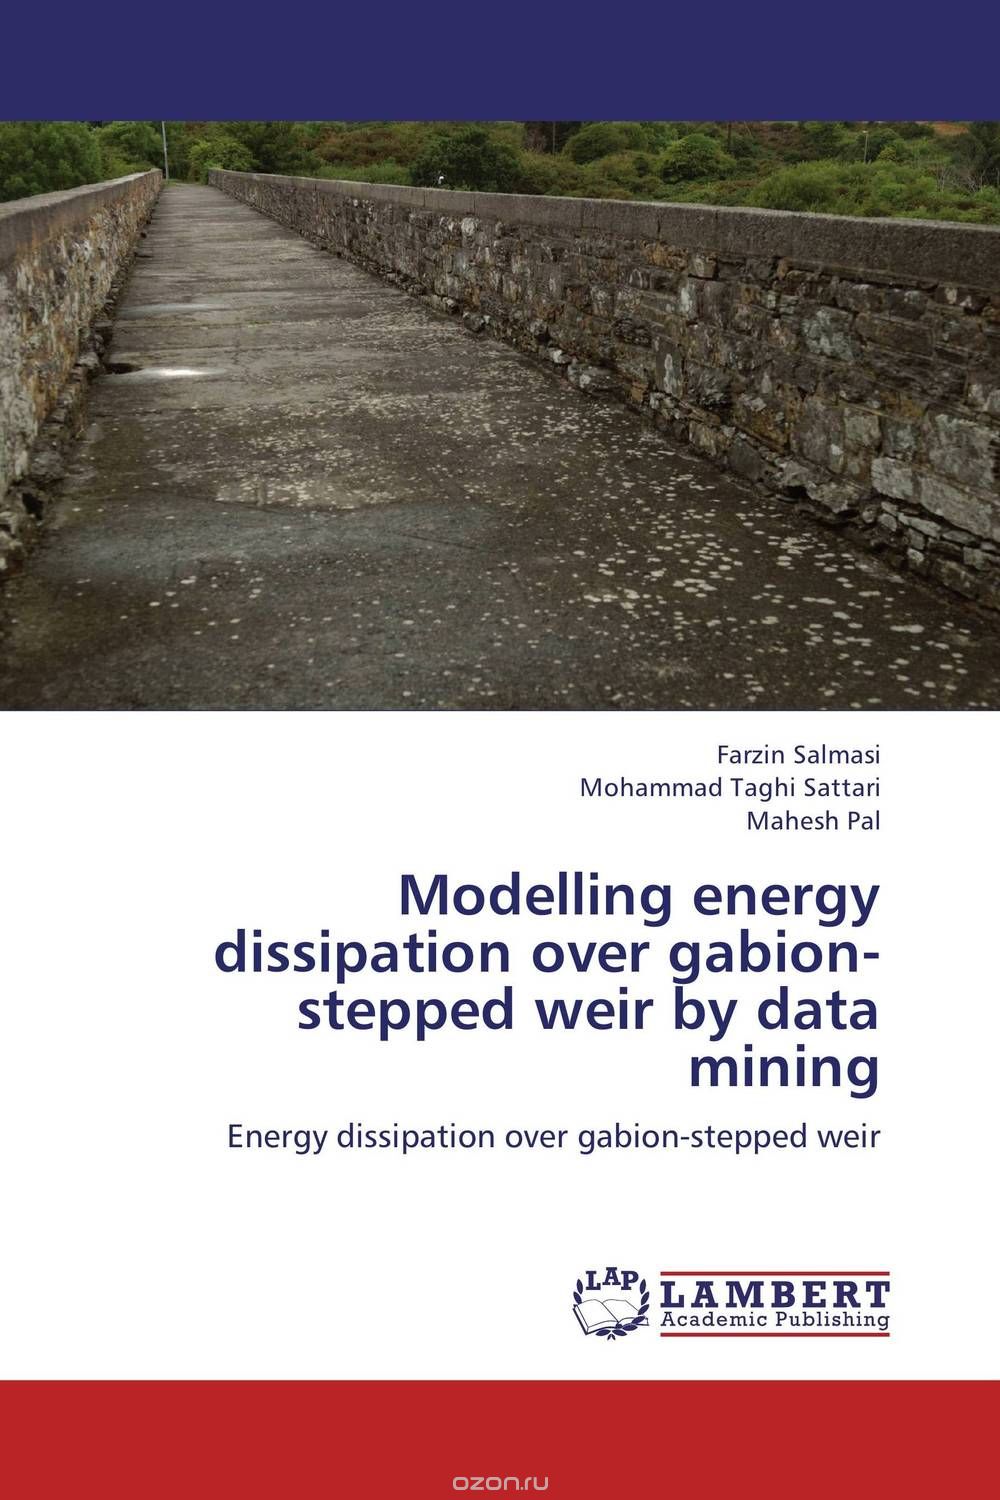 Modelling energy dissipation over gabion-stepped weir by data mining